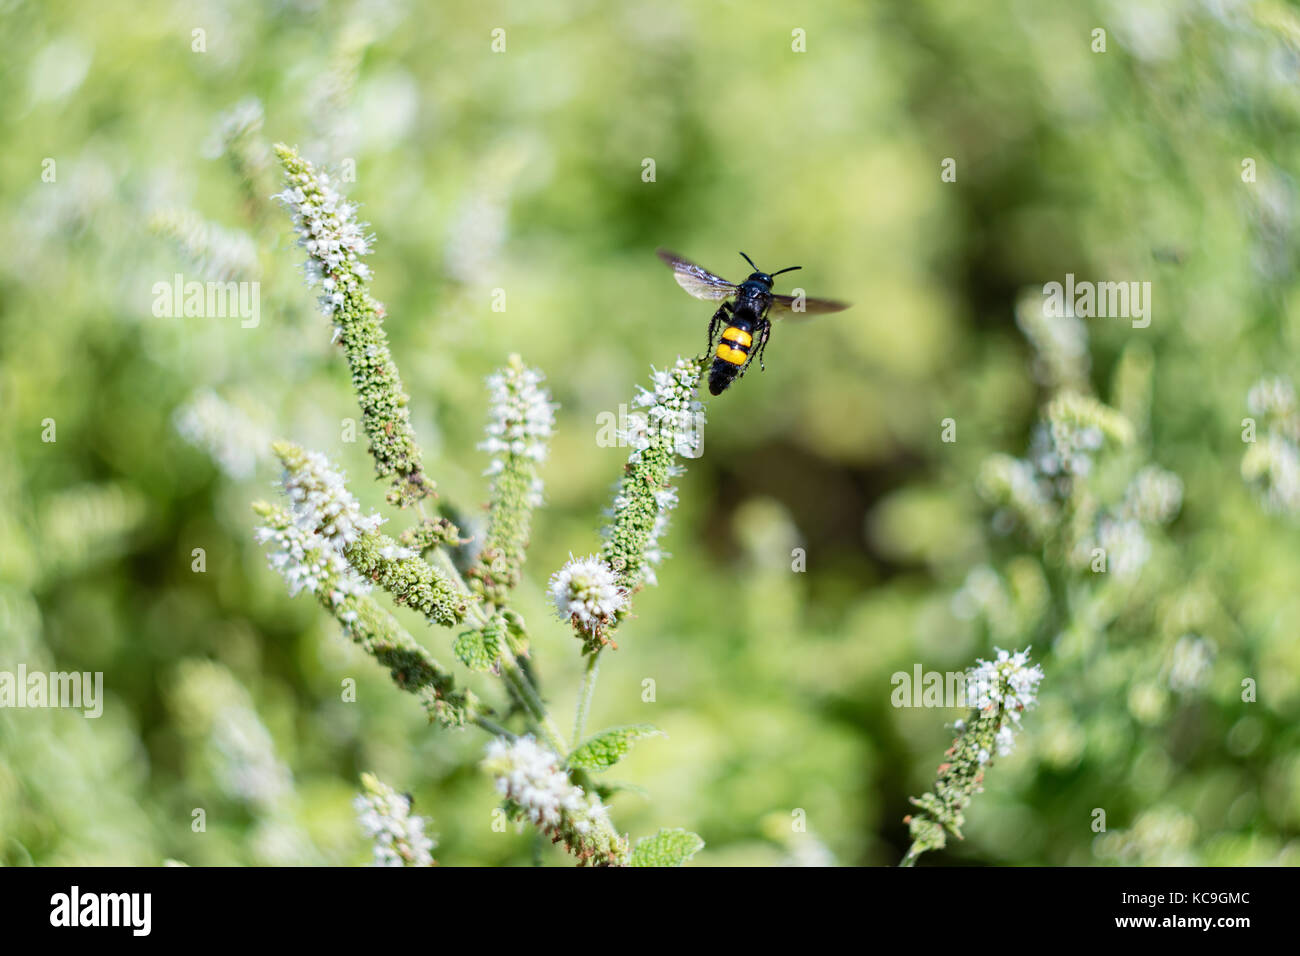 Close-Up Of Black Insect With Yellow Stripes Flying Away From Flowers After Collecting Pollen Stock Photo